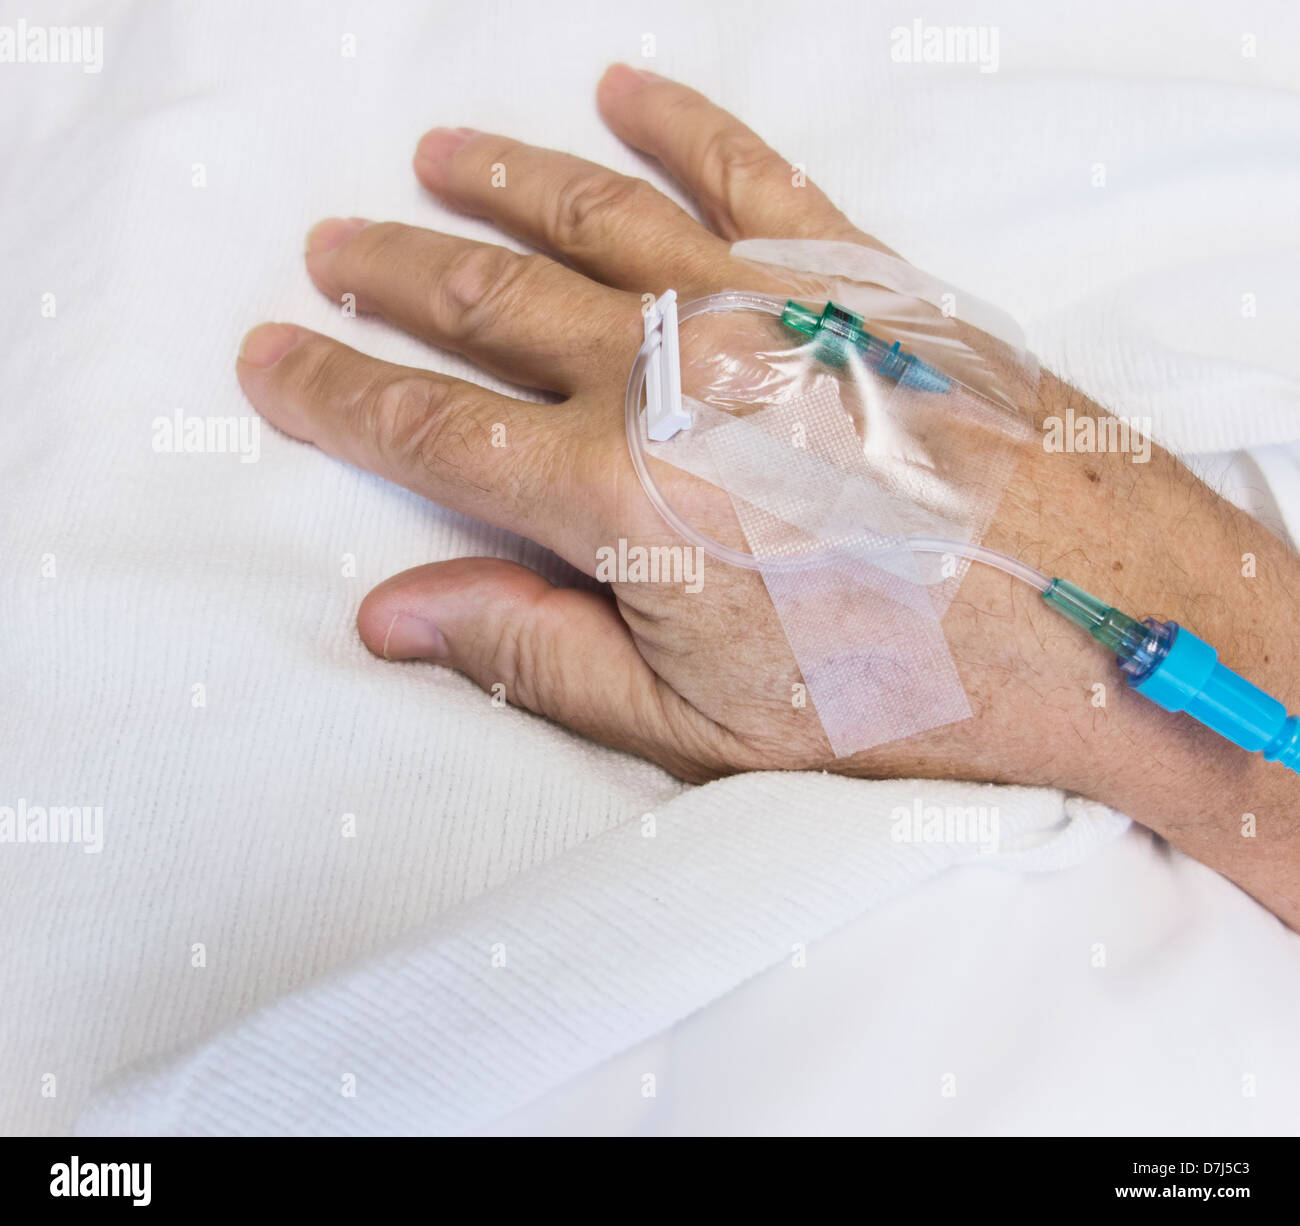 Close up of hand of elderly patient with IV drip attached Stock Photo